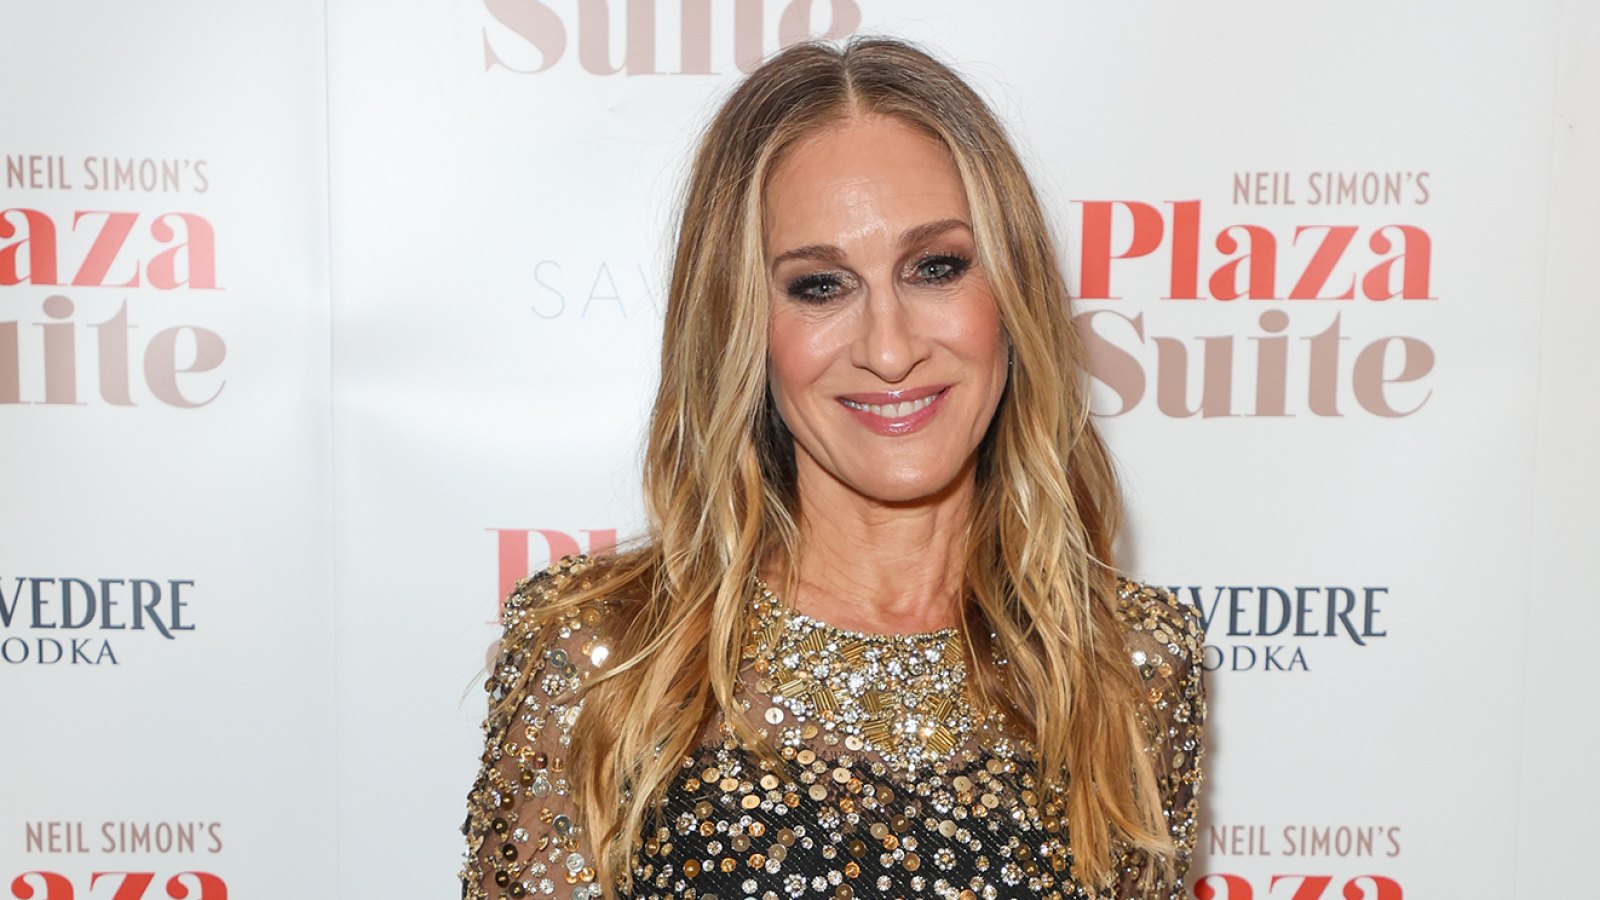 Sarah Jessica Parker at the gala performance afterparty for "Plaza Suite" at The Savoy Hotel in London on January 28, 2024.